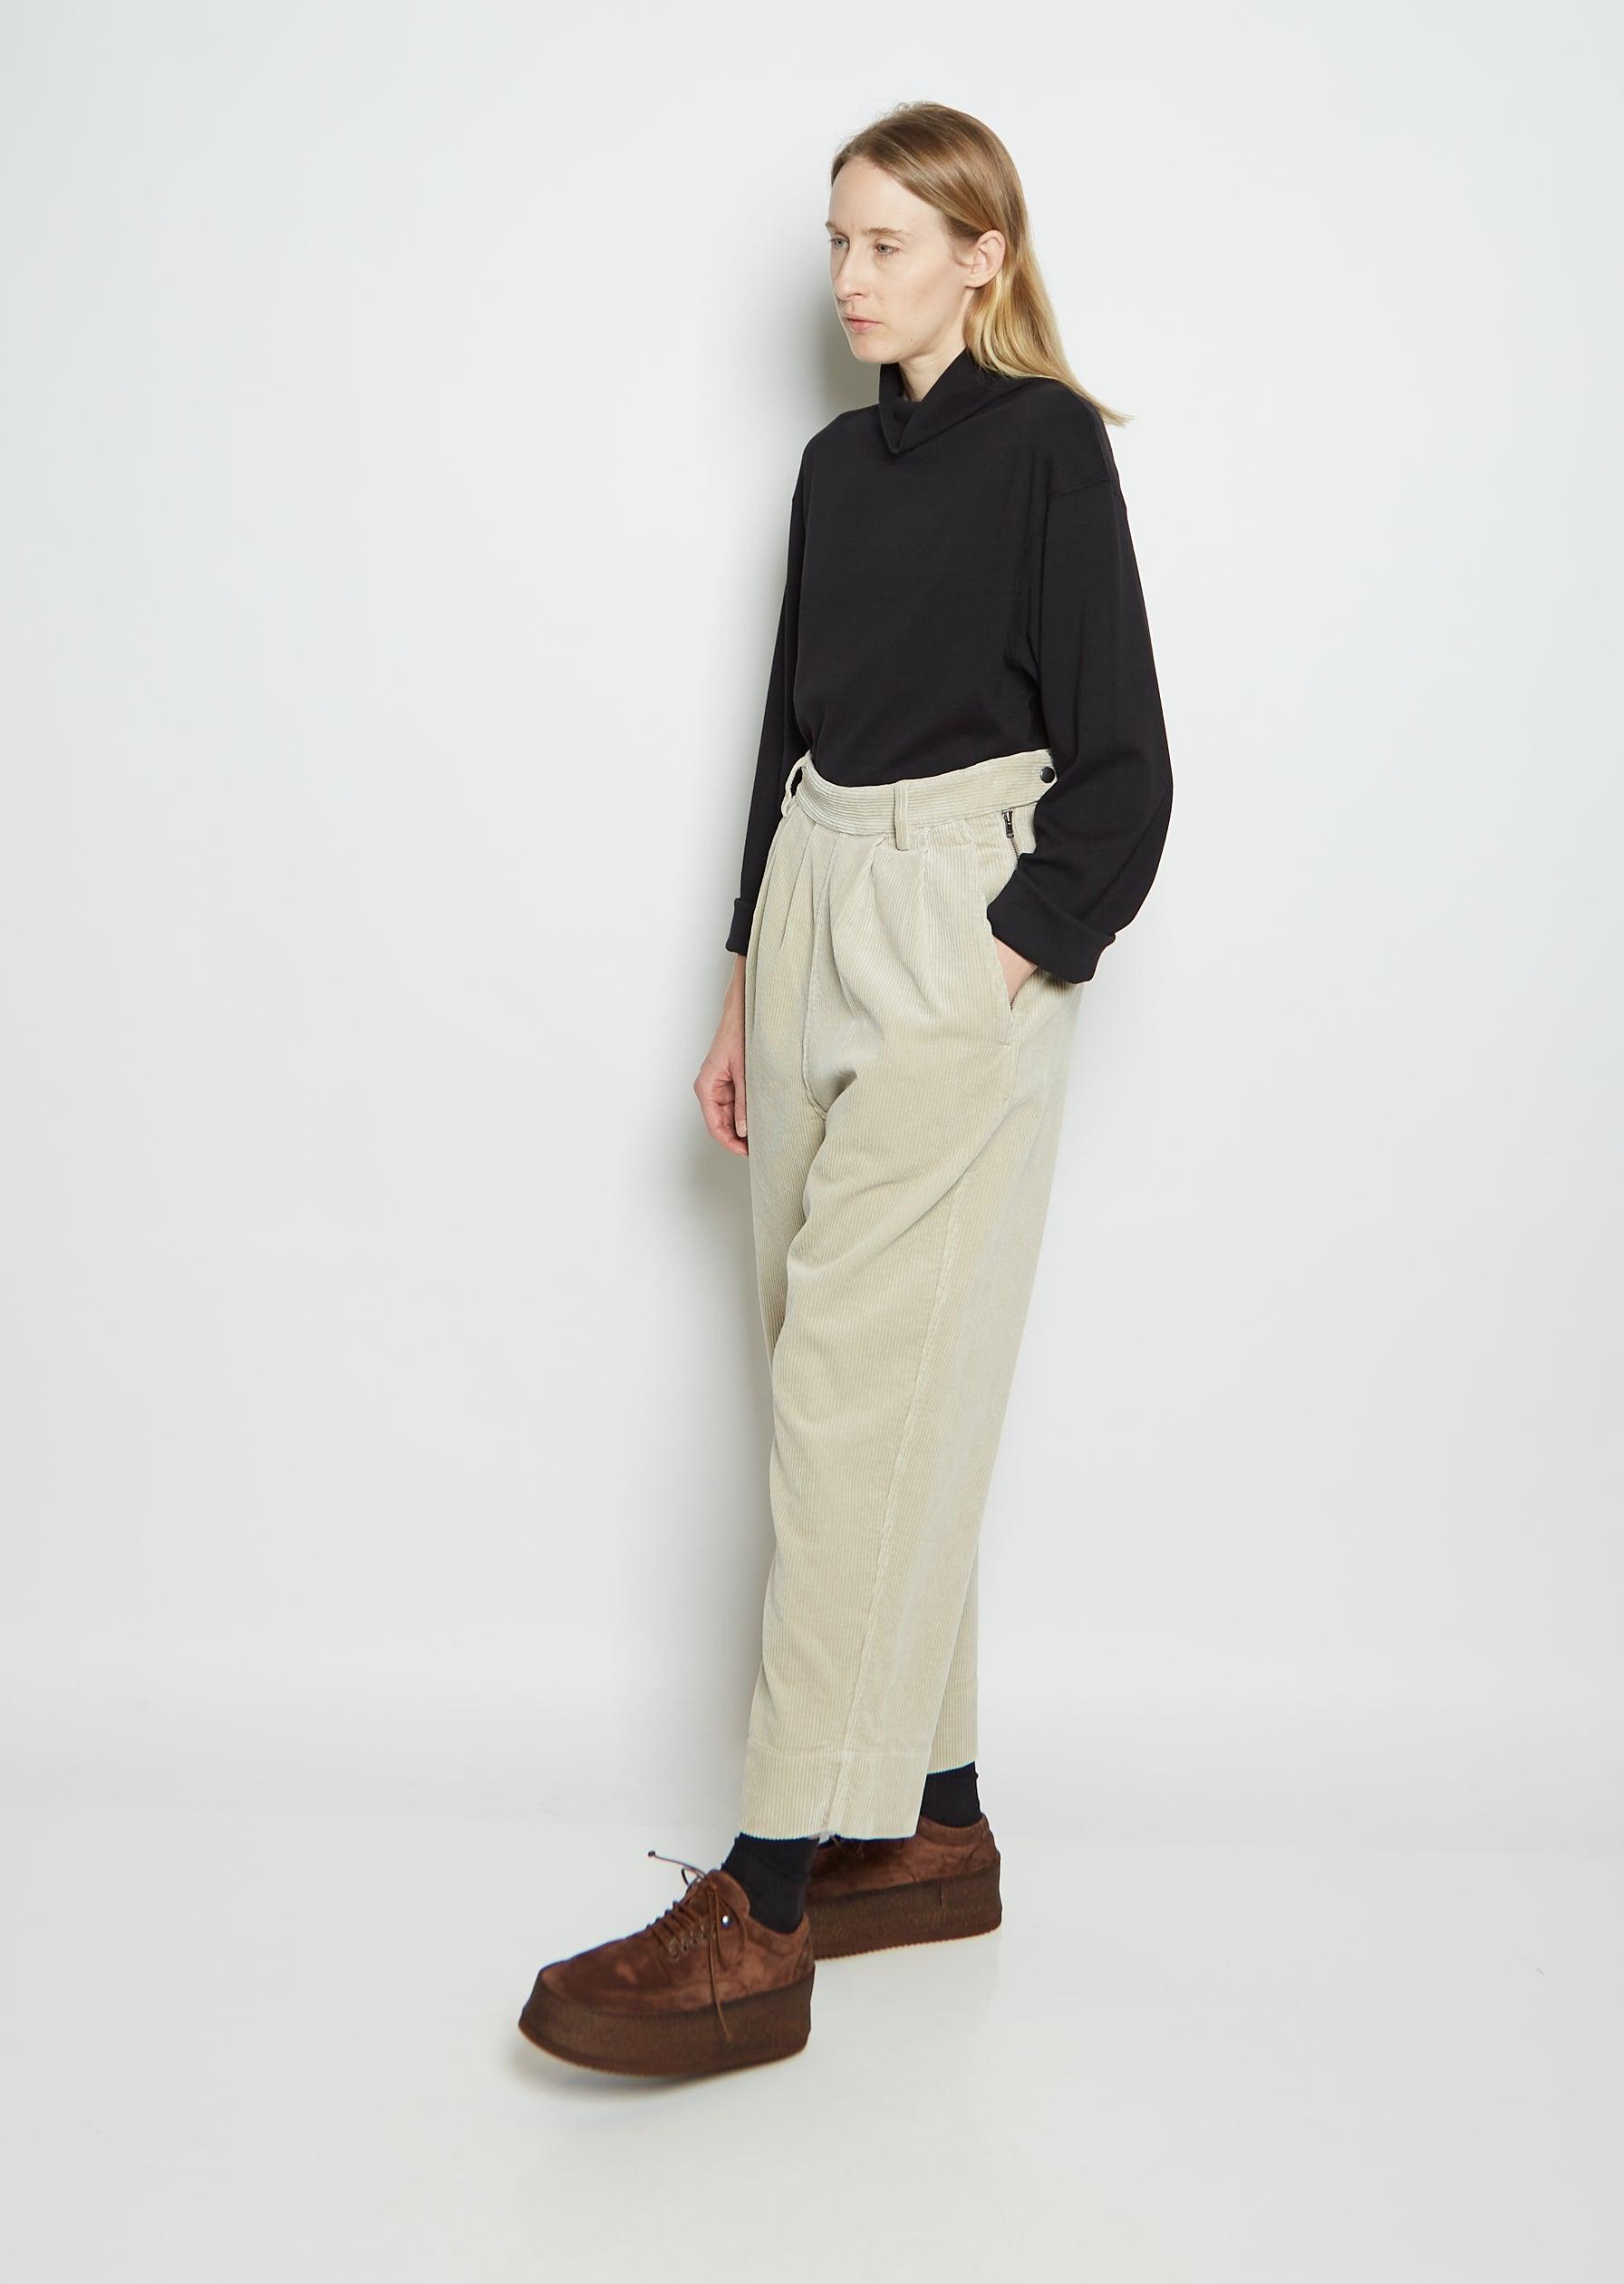 MHL by Margaret Howell Cotton Corduroy Side Closure Trouser in